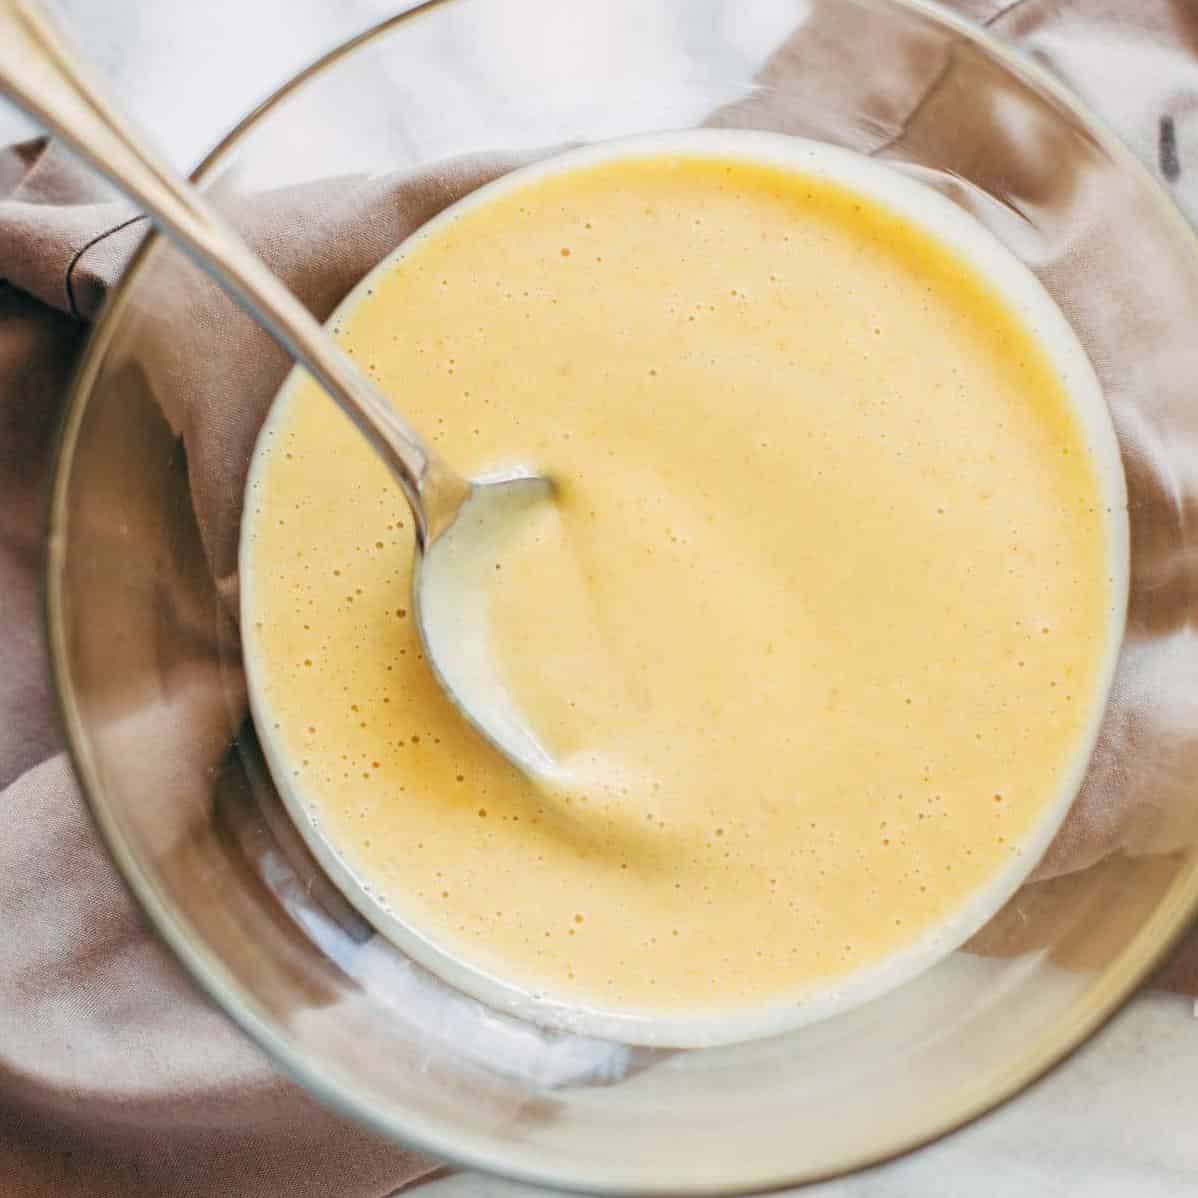  Use this honey mustard dip as a dressing for your favorite salad.